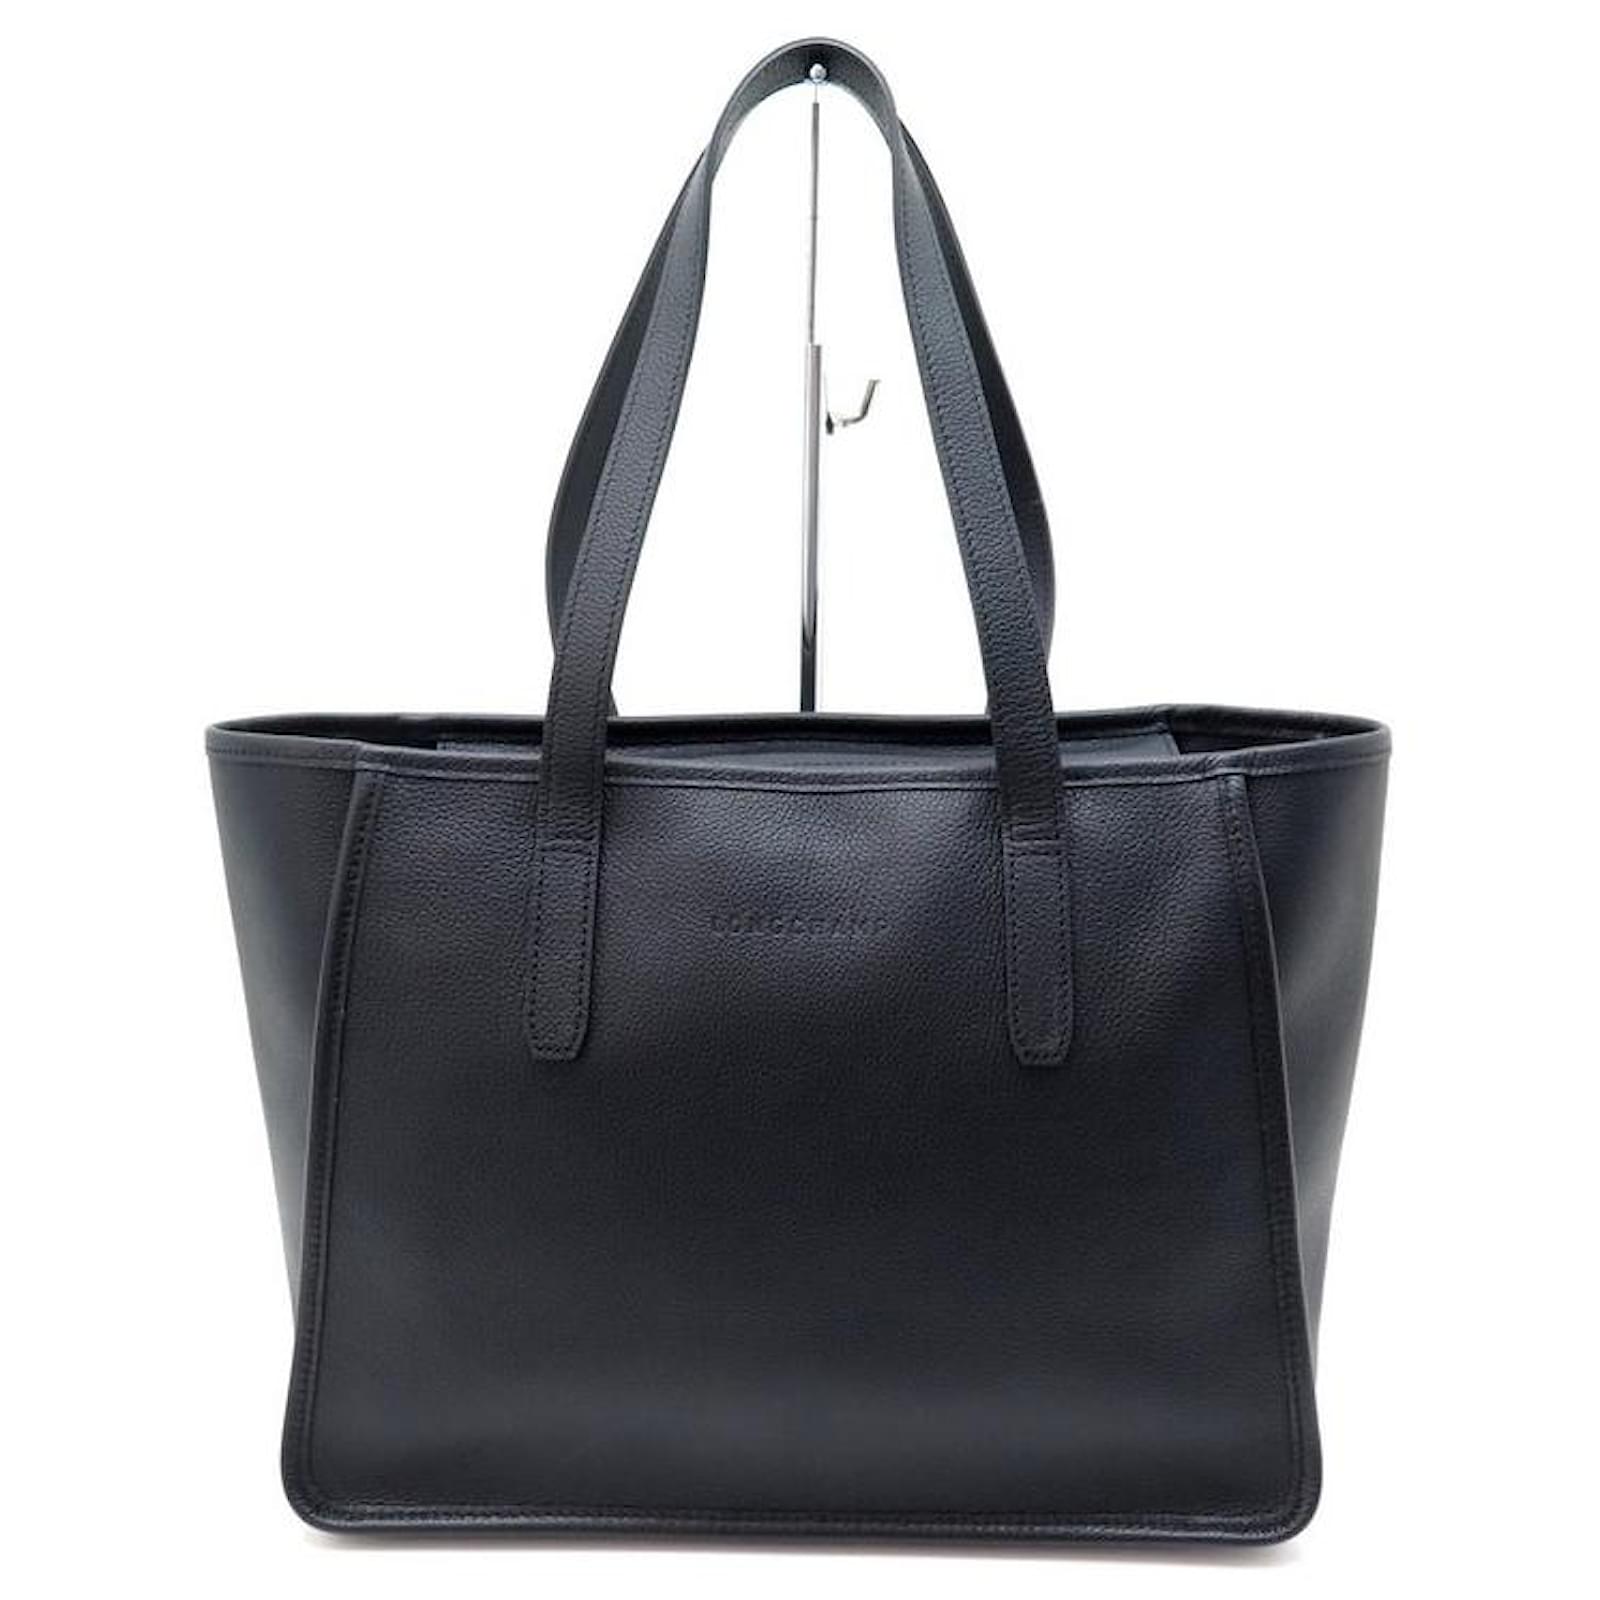 NEW LONGCHAMP CABAS LE FOULONNE HANDBAG IN BLACK GRAINED LEATHER HAND ...